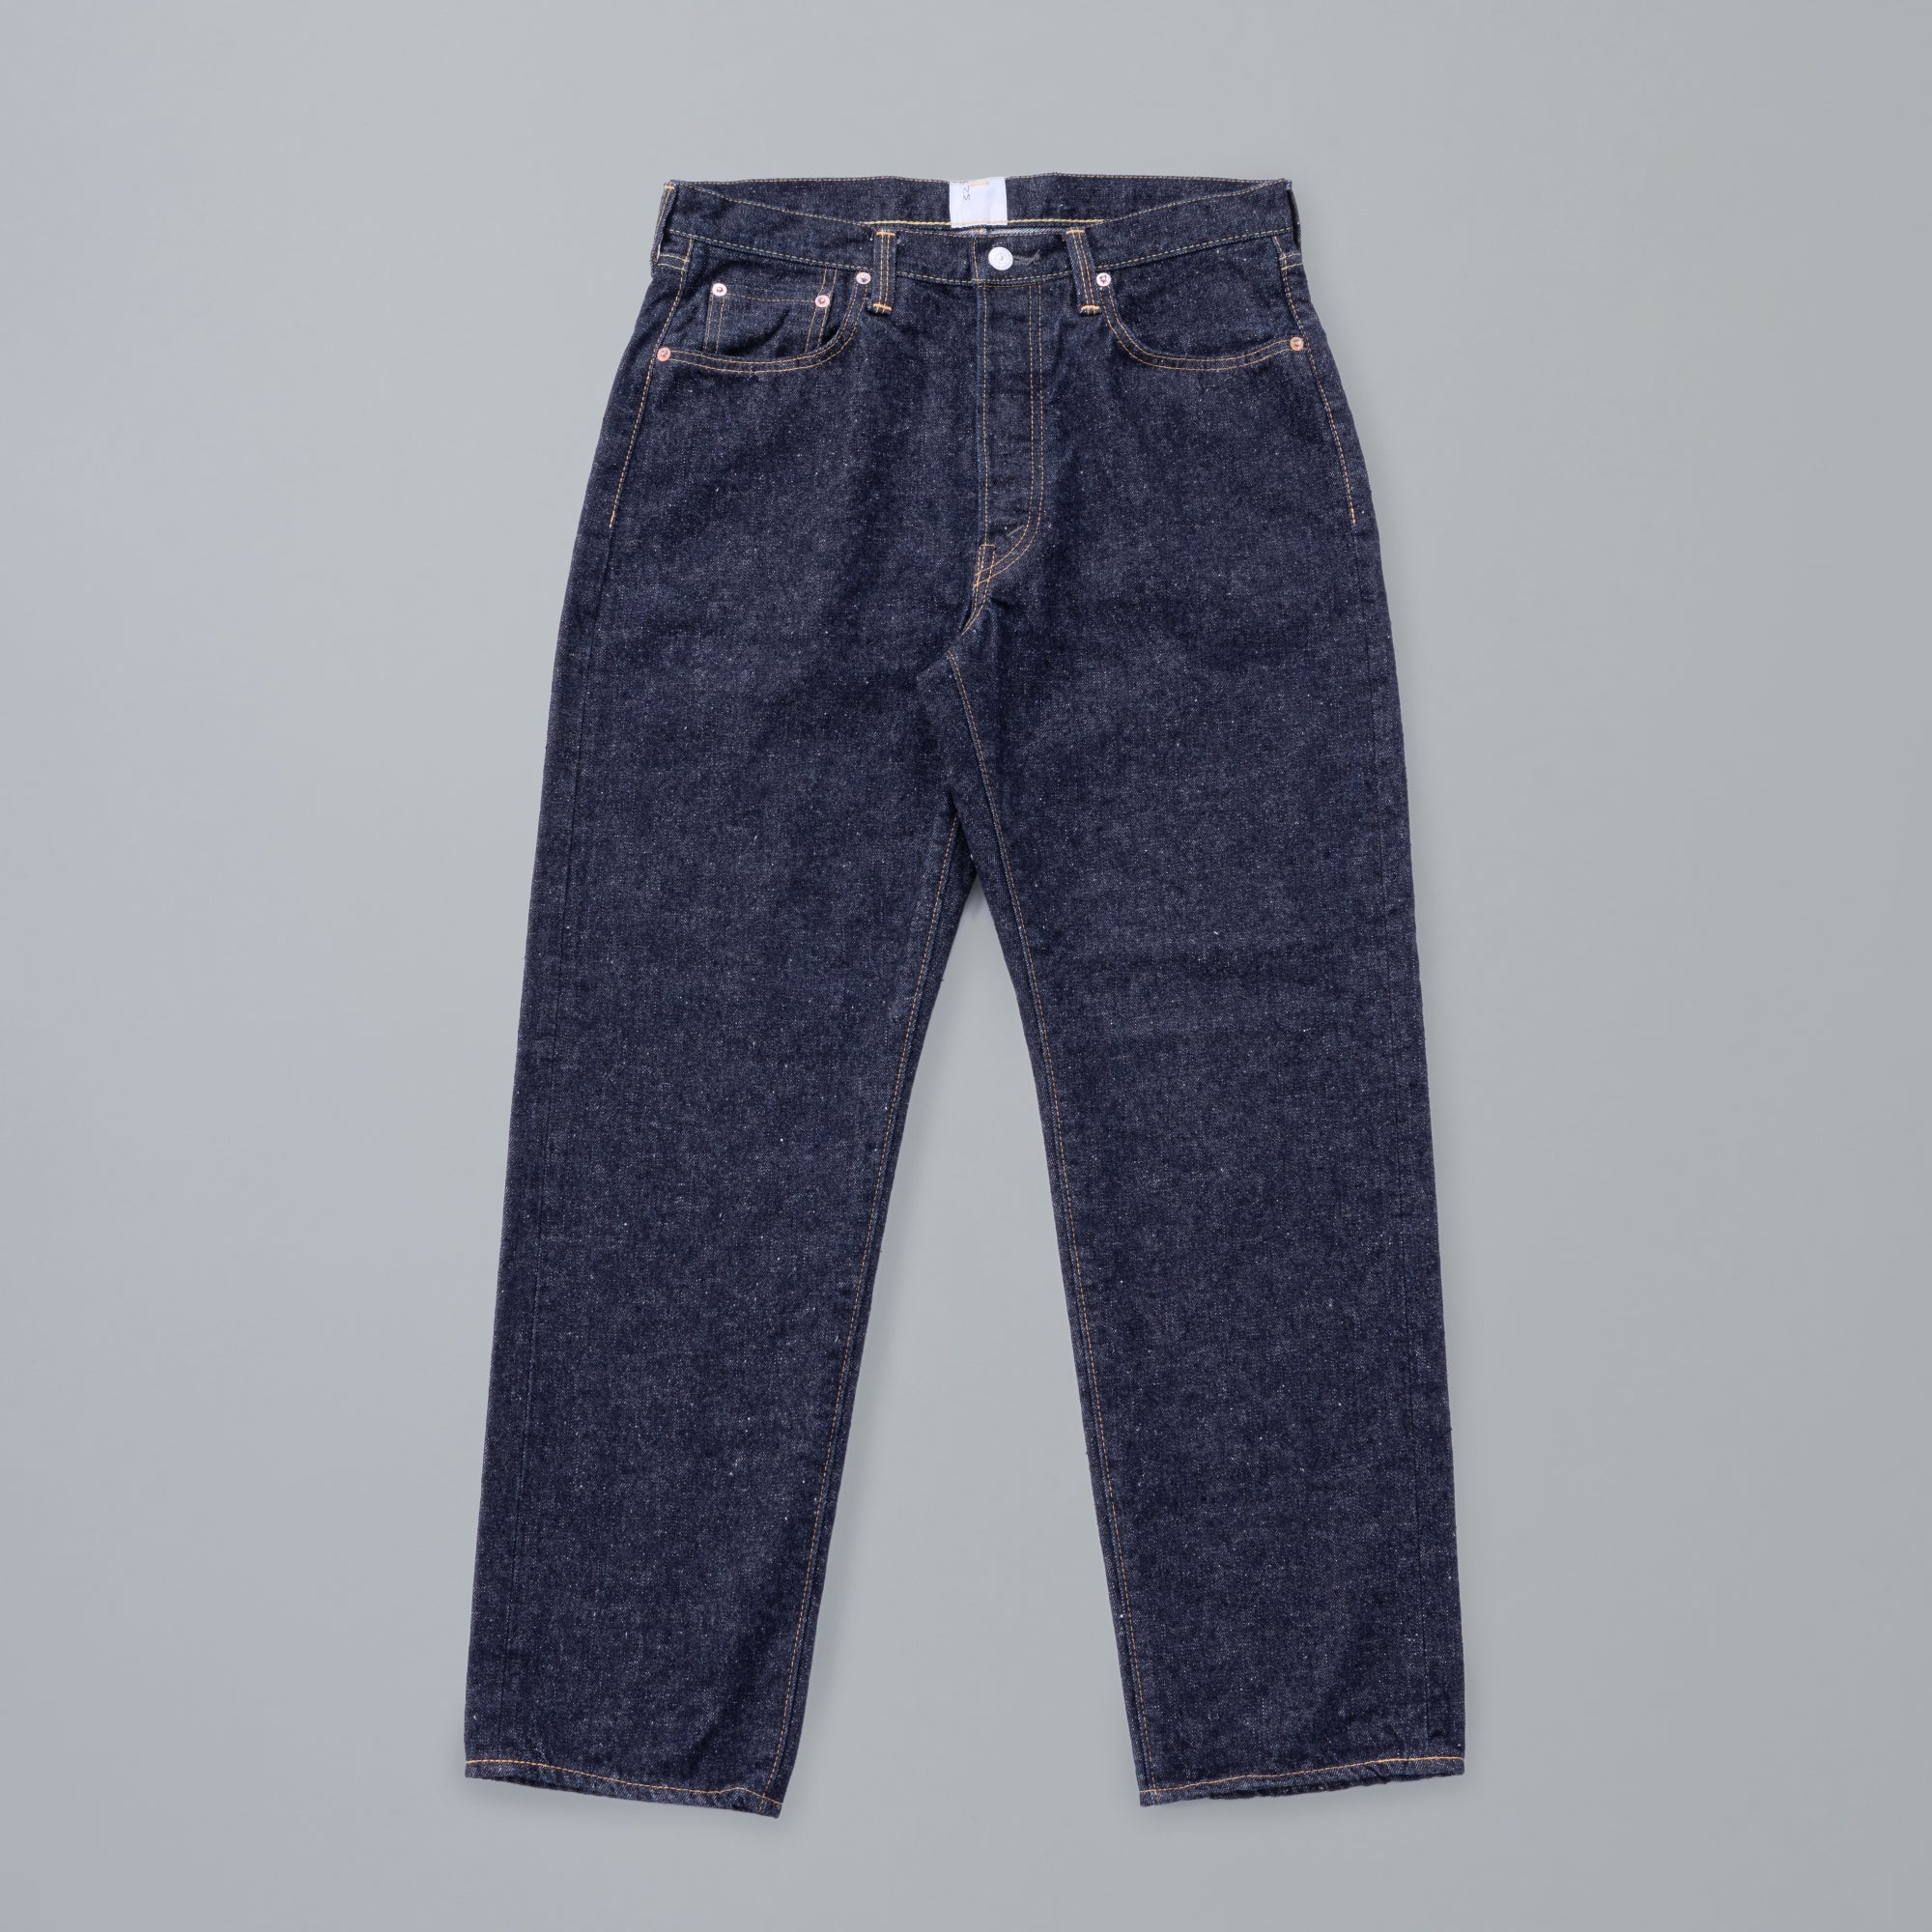 New Manual #017 LV 61's TAPERED JEANS 34